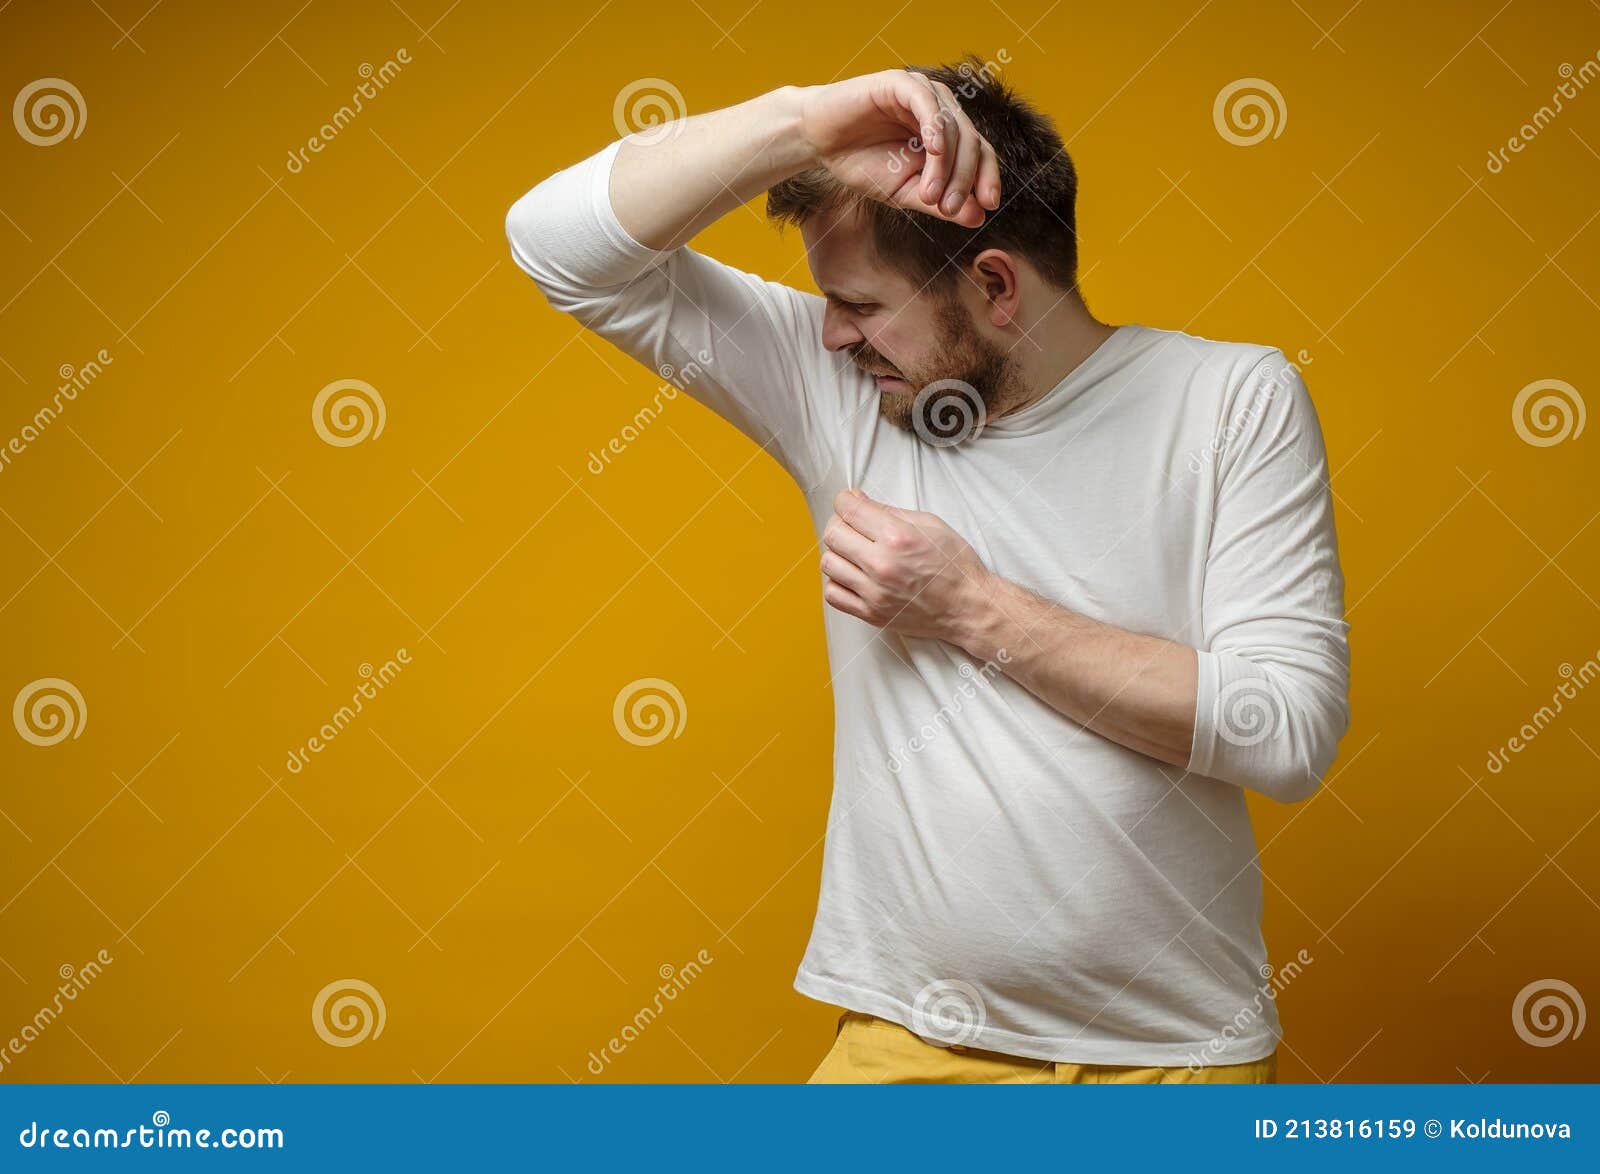 man in a white t-shirt sniffs his armpits, annoyed by the problem of foul perspiration and body stench. copy space.